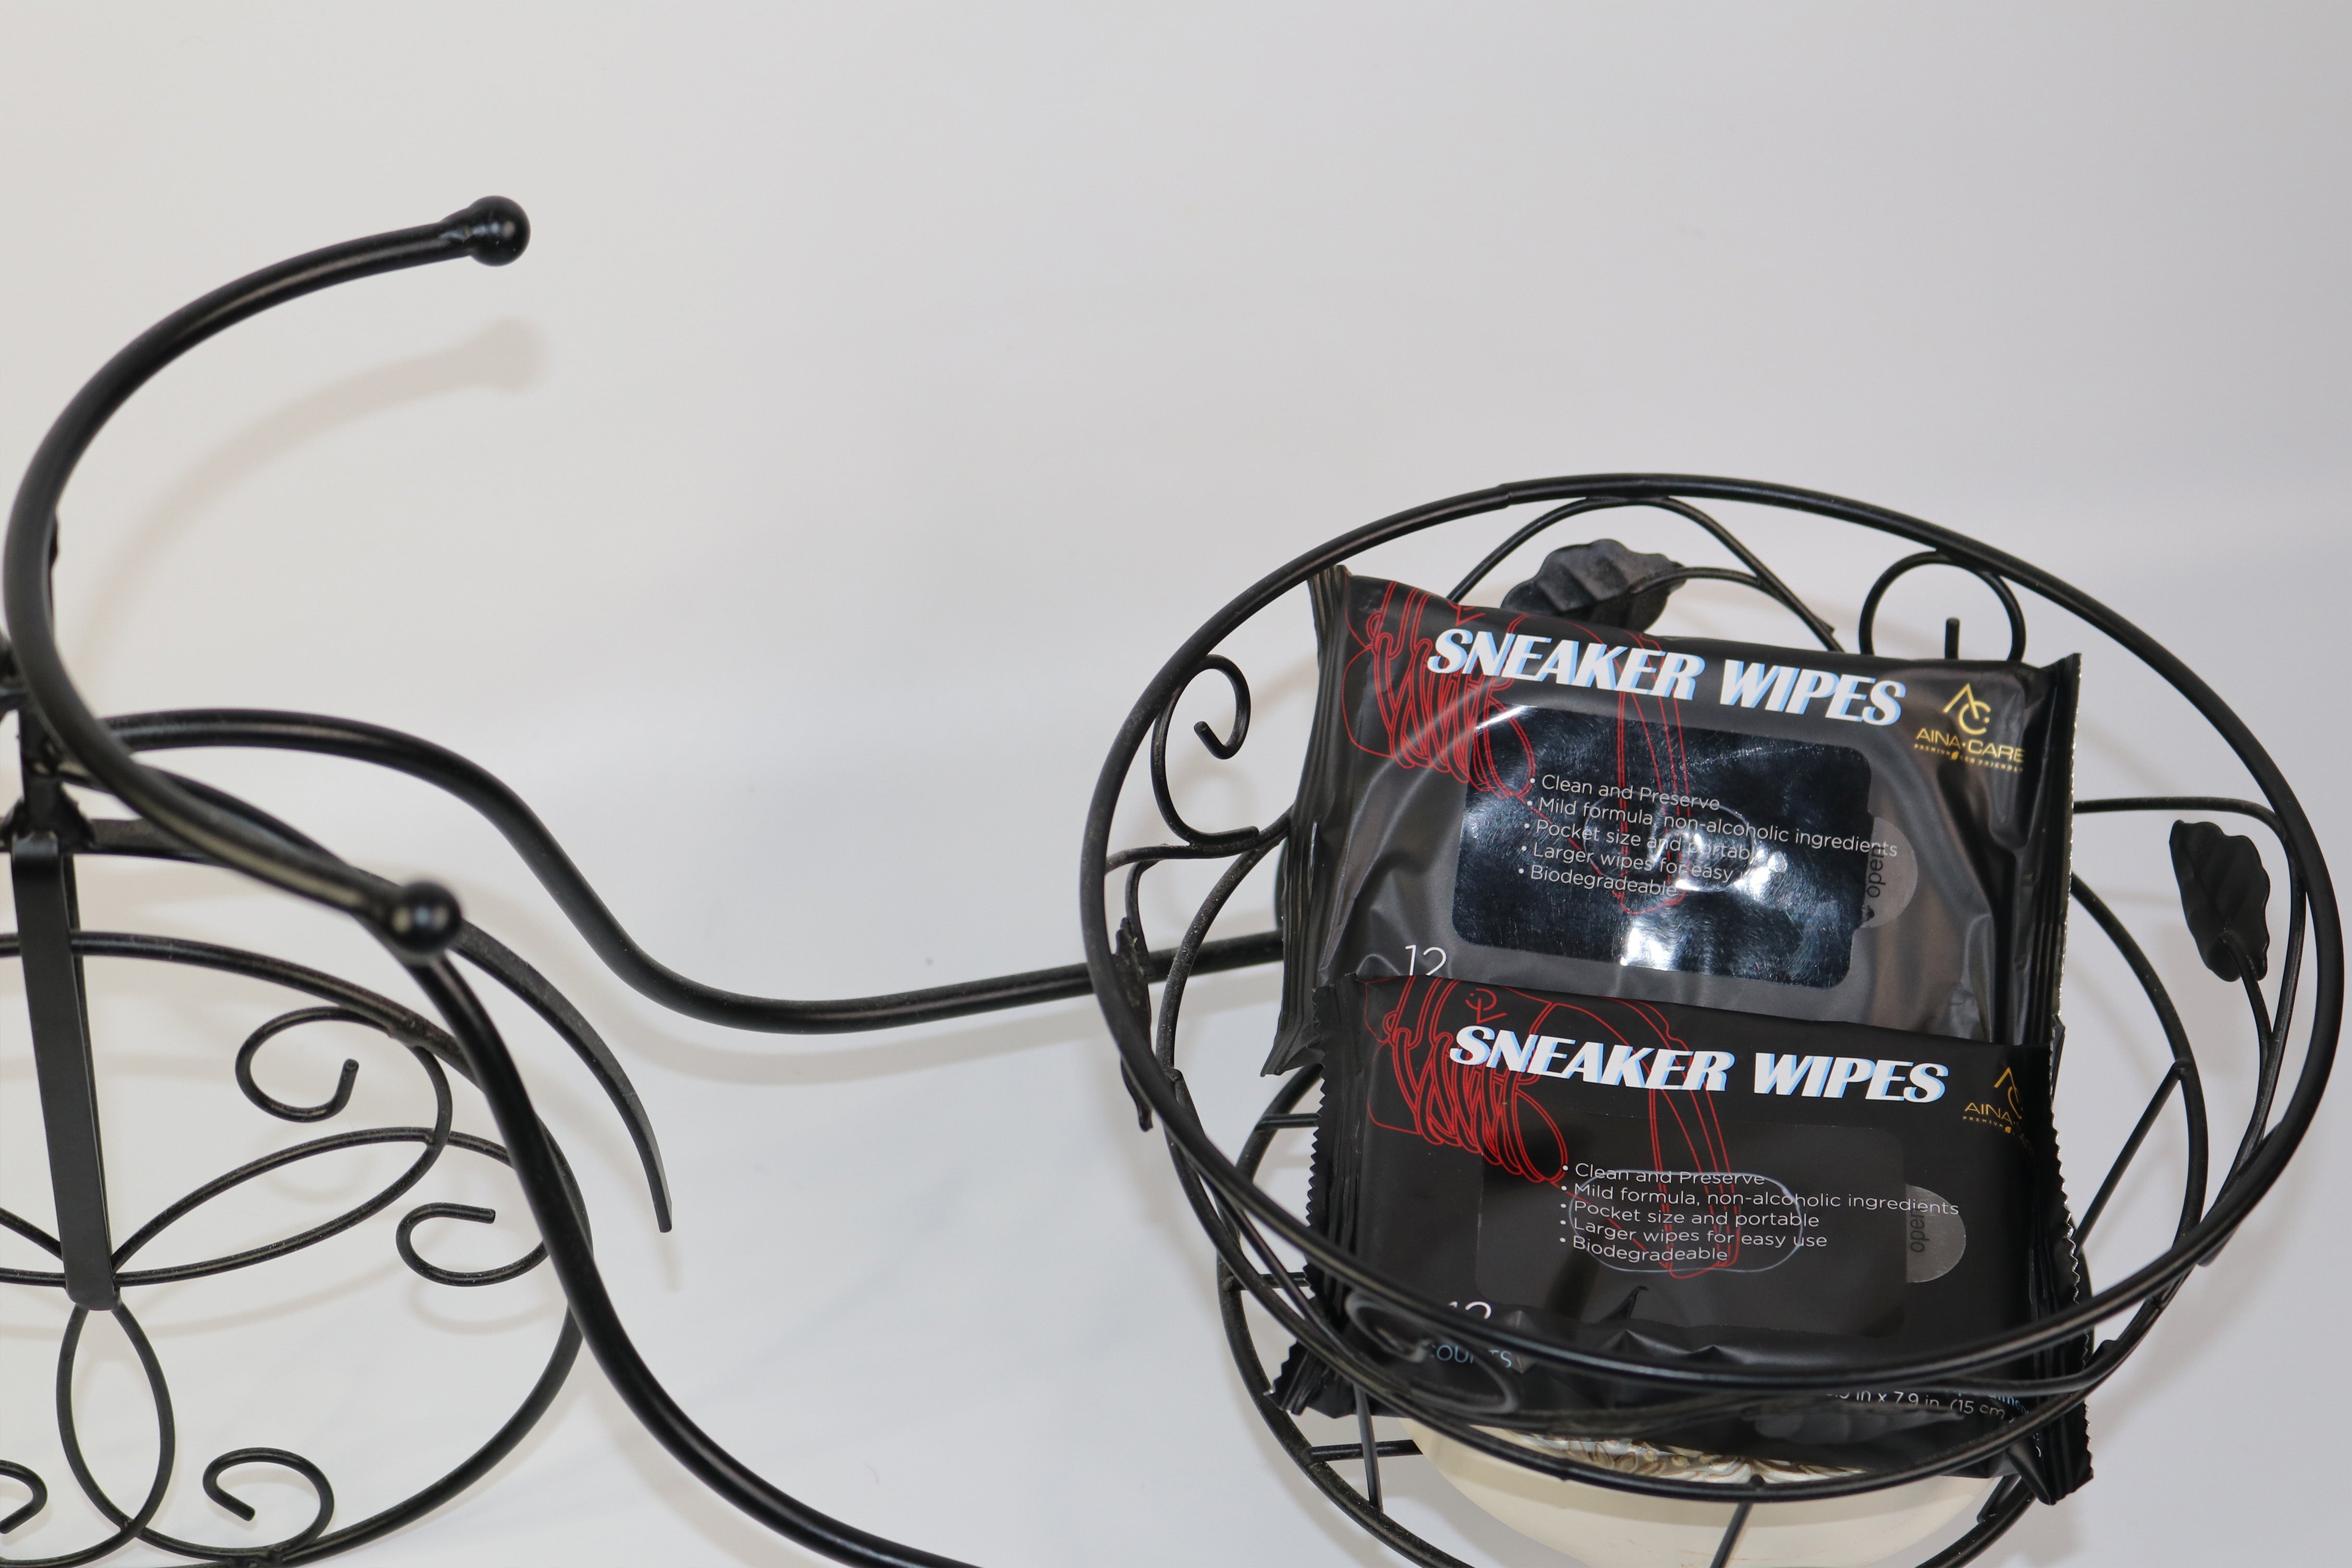 Two packs of All-Purpose Sneaker Wipes from AinaCare inside of a wire bicycle basket on a white background.